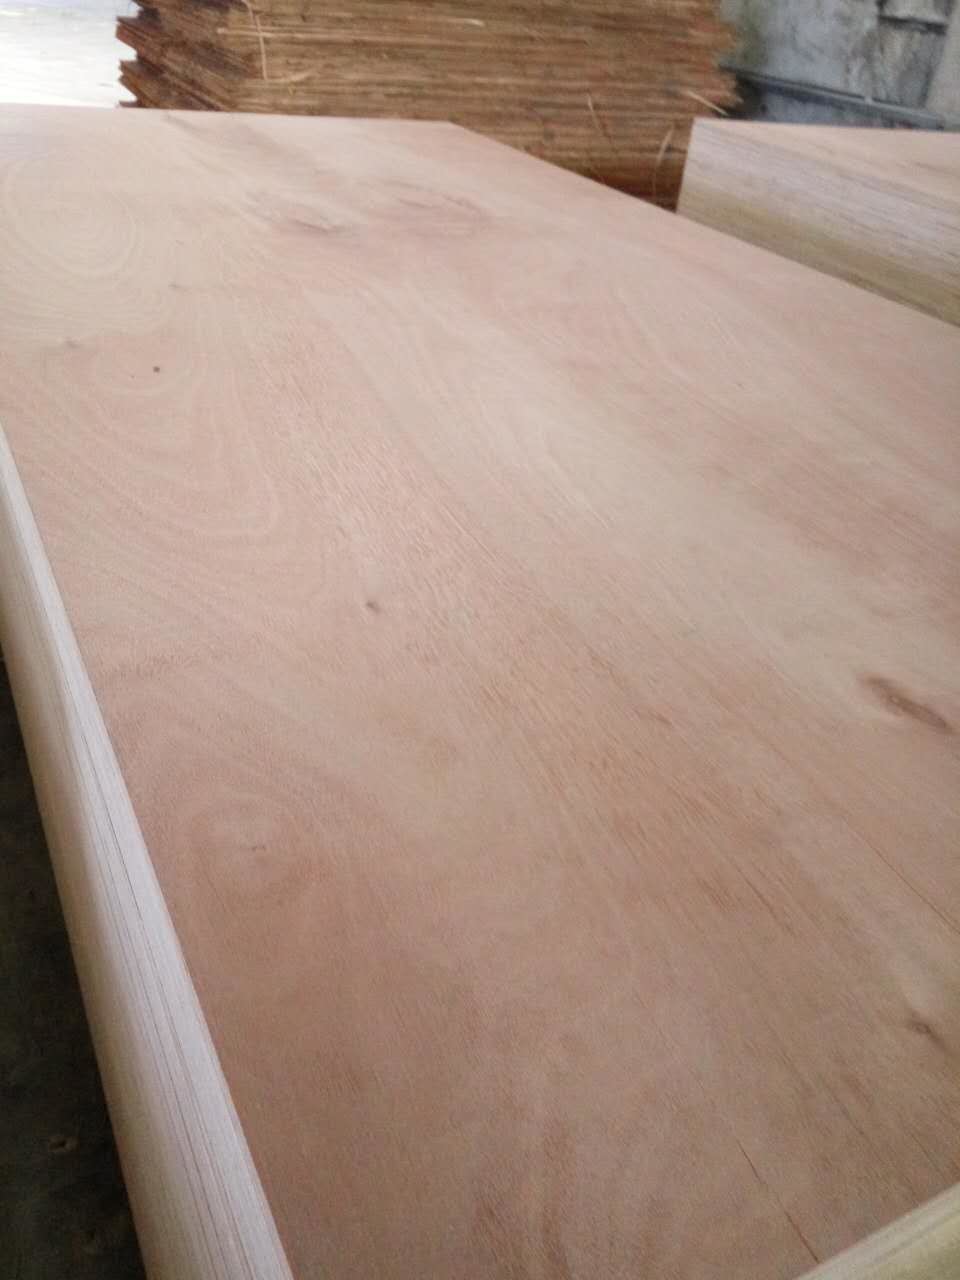 Plywood Prices /Plywood Sheet /Waterproof Plywood for Furniture, Packing and Pallets